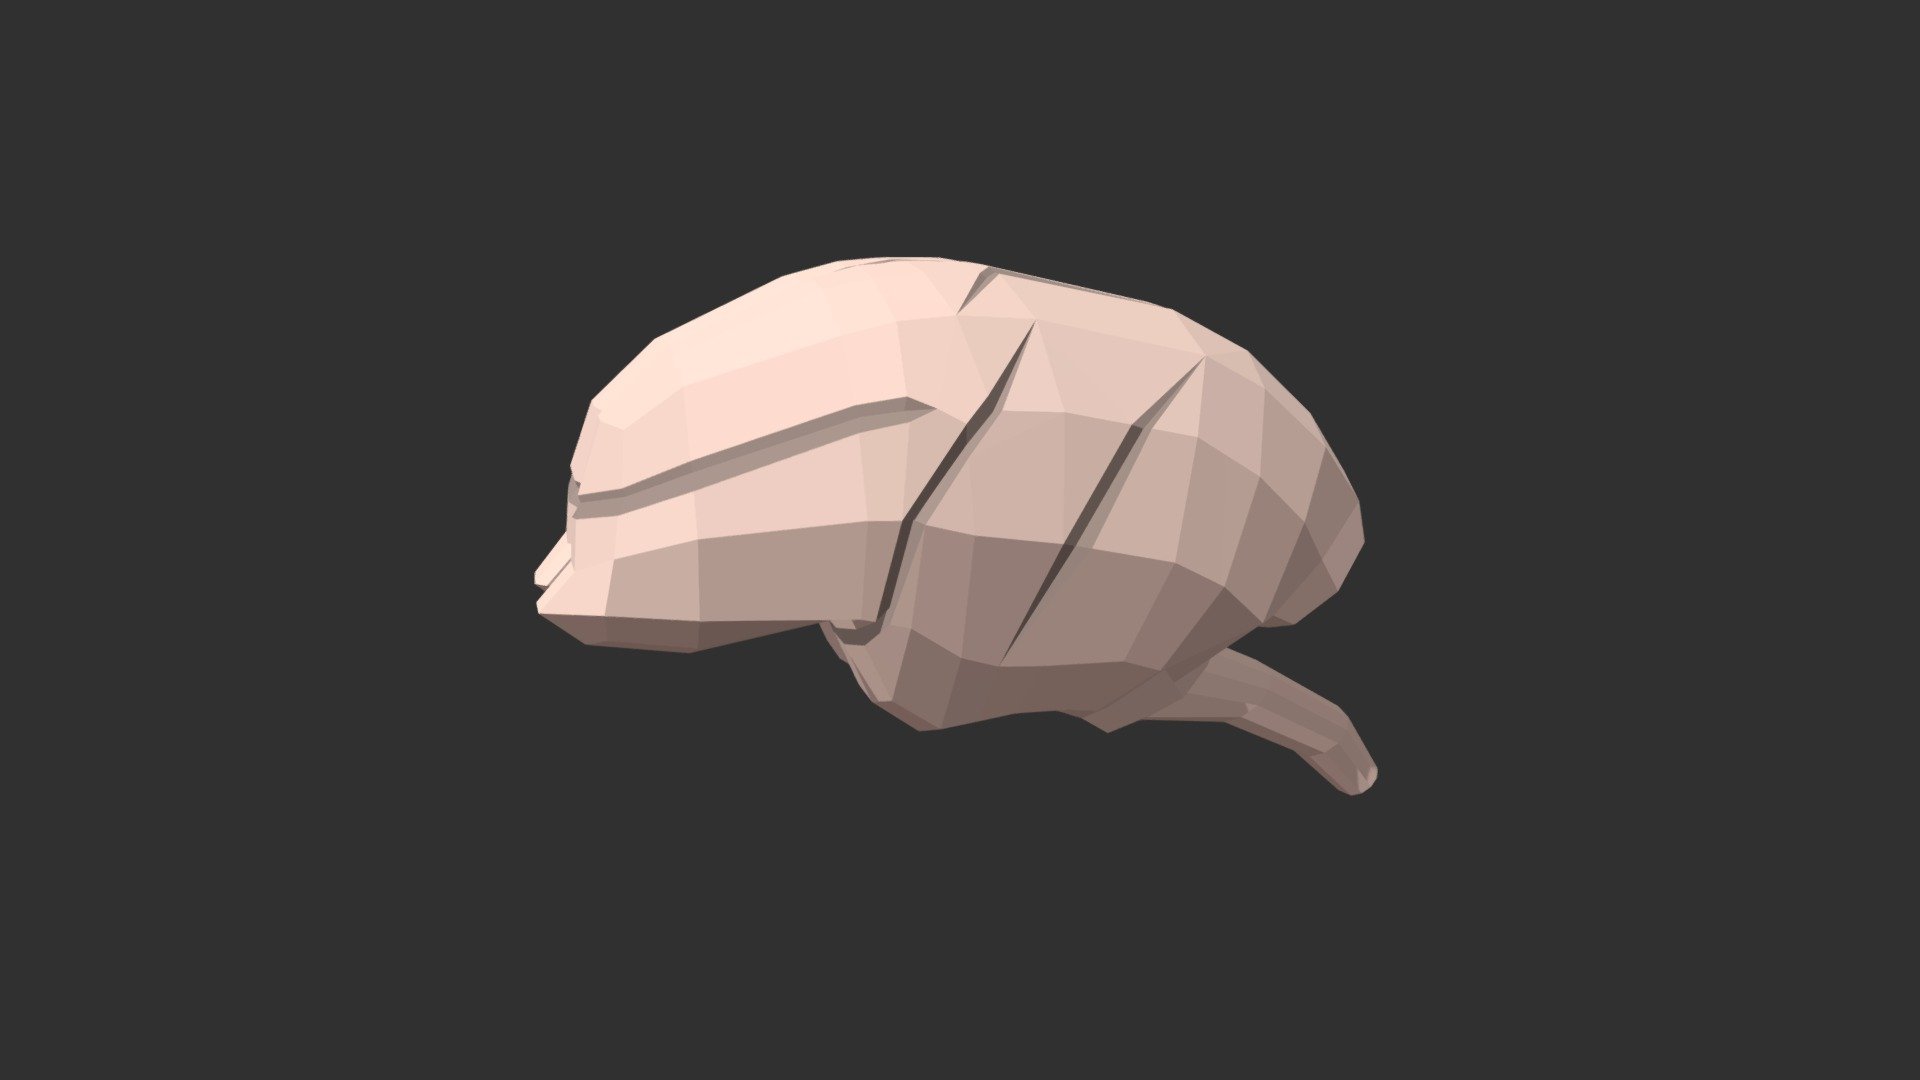 This is a low poly 3D model of a monkey-lemur brain. The low poly brain was modeled and prepared for low-poly style renderings, background, general CG visualization presented as one mesh with quads/tris.

Verts : 495 Faces : 522.

The 3D model have simple materials with diffuse colors.

No ring, maps and no UVW mapping is available.

The original file was created in blender. You will receive a 3DS, OBJ, FBX, blend, DAE, Stl, glTF.

All preview images were rendered with Blender Cycles. Product is ready to render out-of-the-box. Please note that the lights, cameras, and background is only included in the .blend file. The model is clean and alone in the other provided files, centred at origin and has real-world scale 3d model